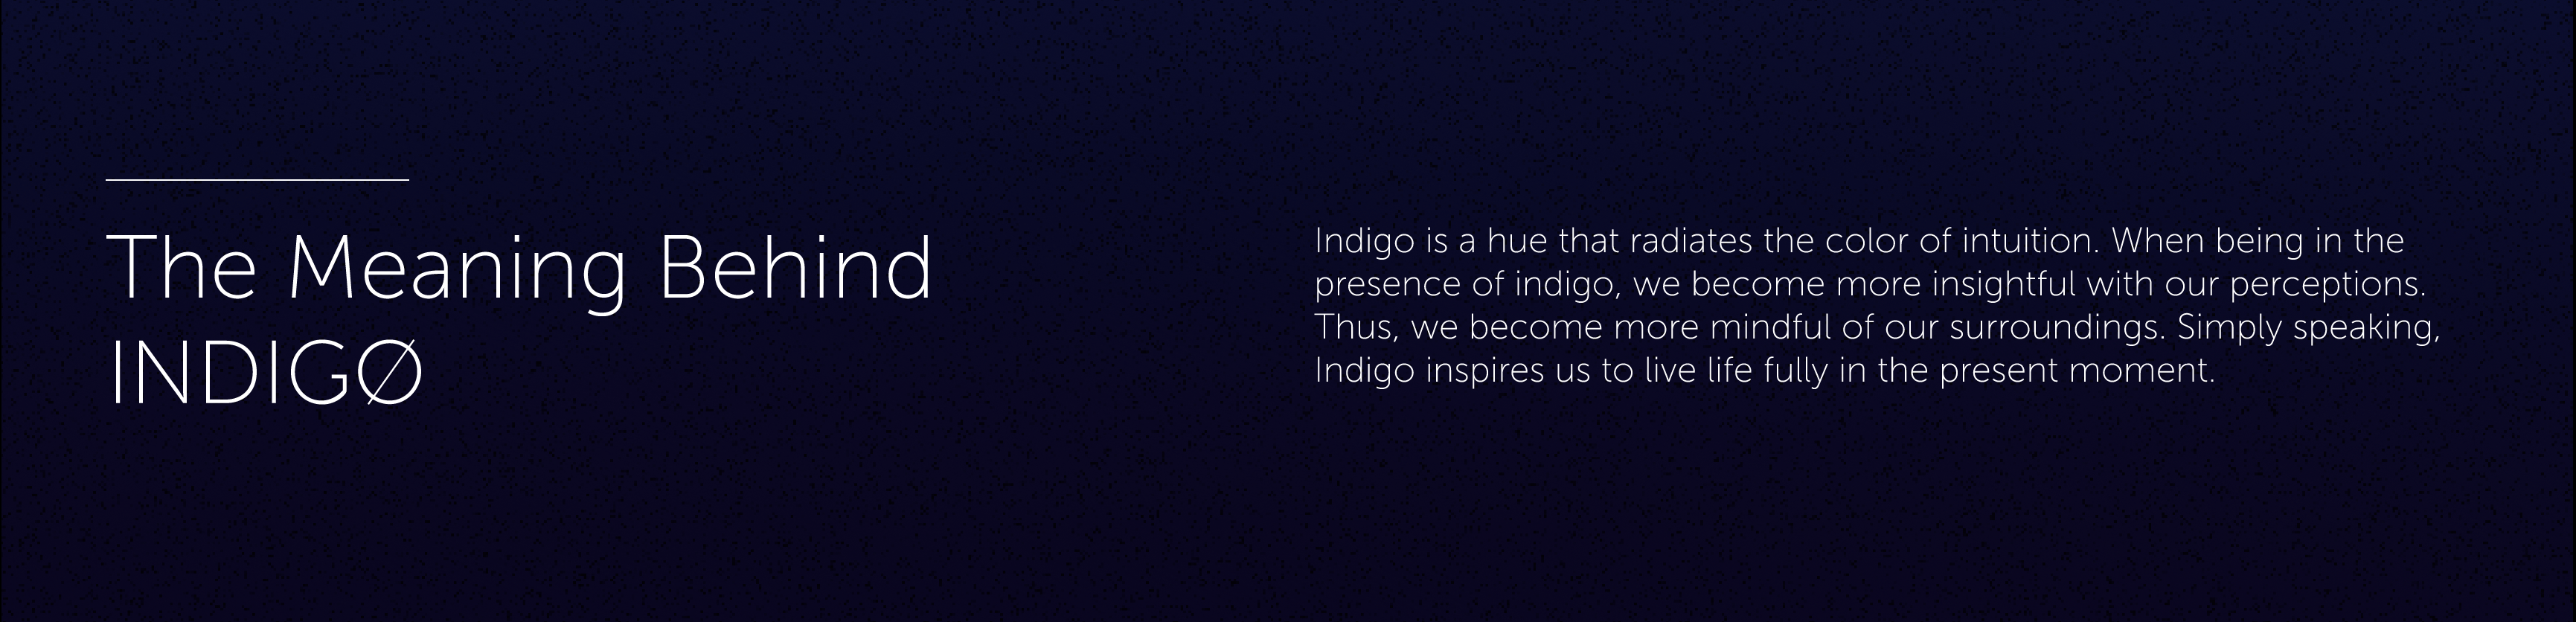 The-Meaning-Behind-INDIGO